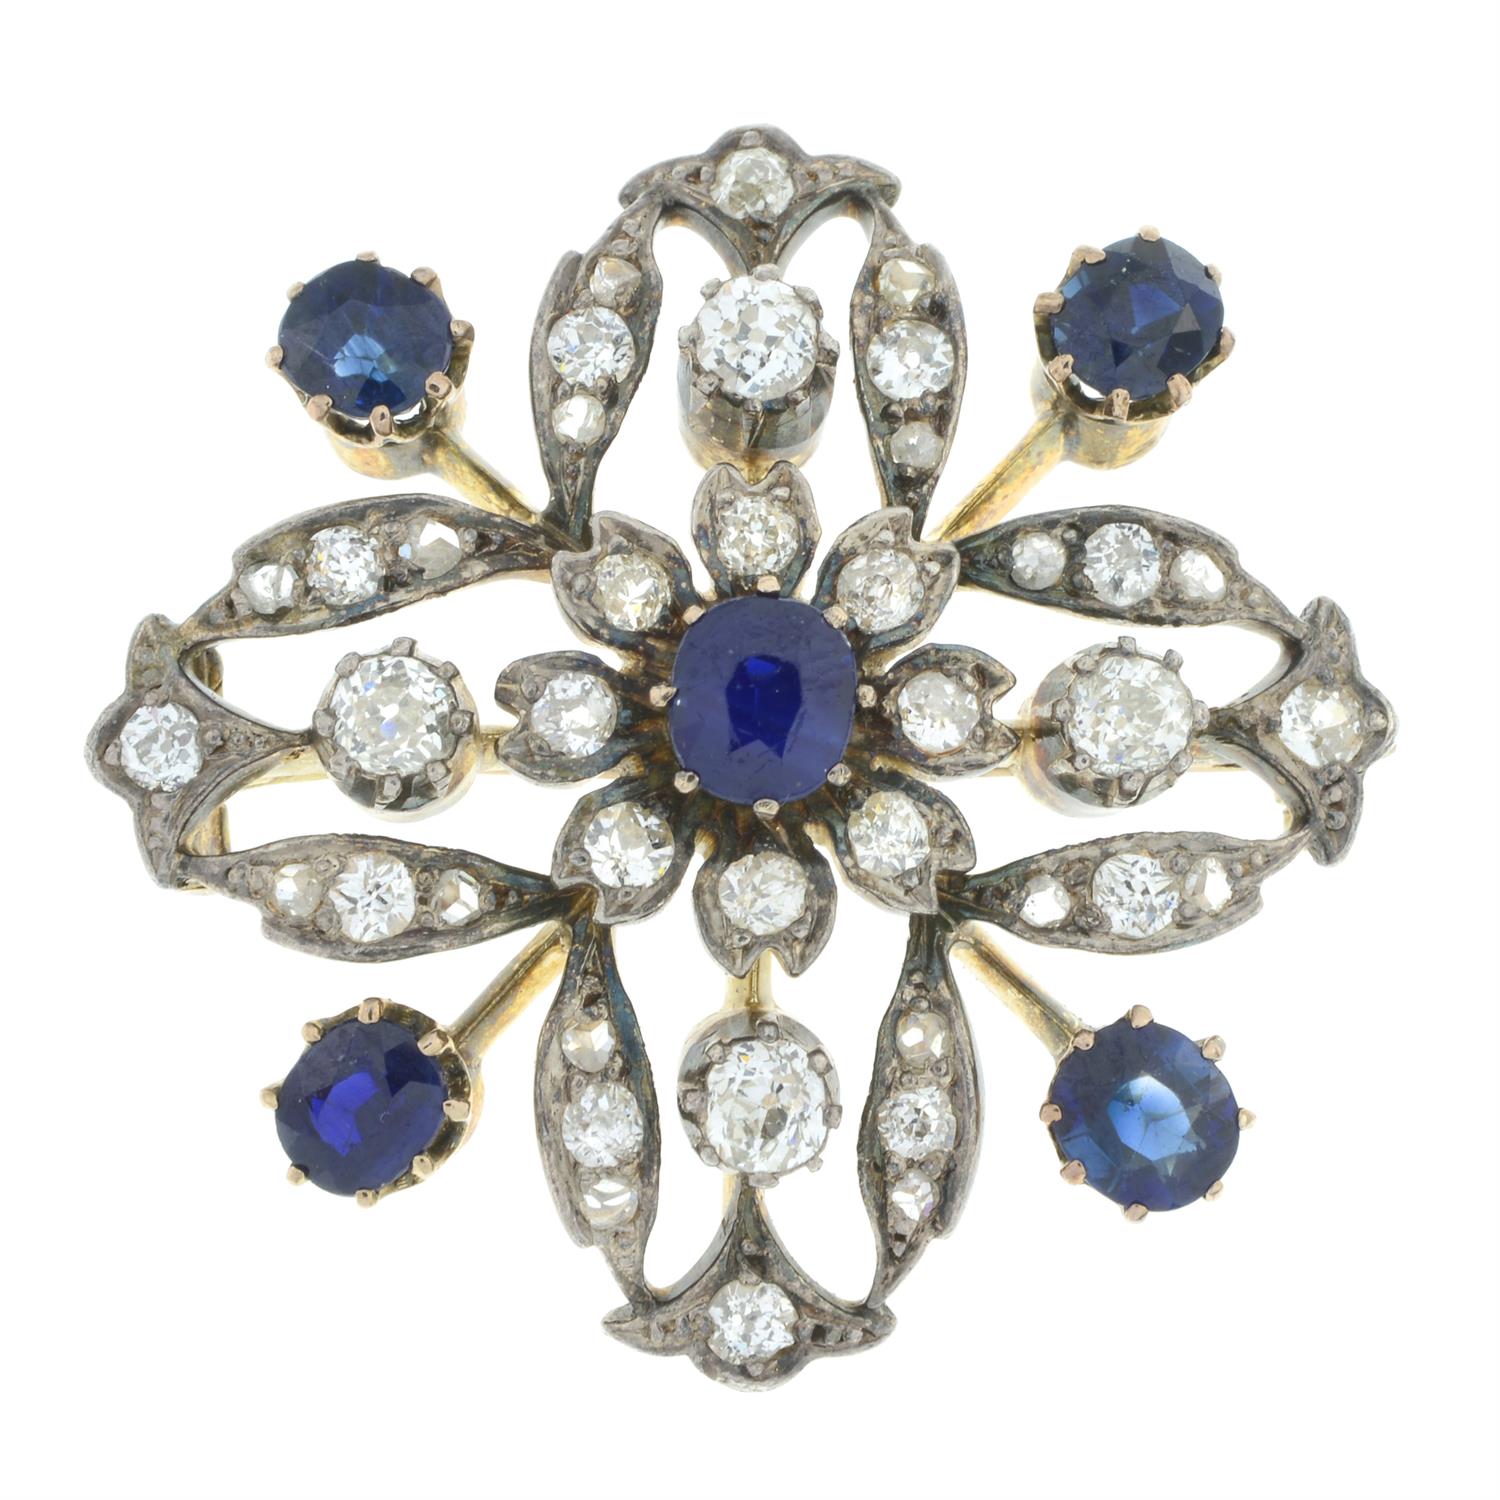 Victorian silver and gold, sapphire and diamond brooch - Image 2 of 4